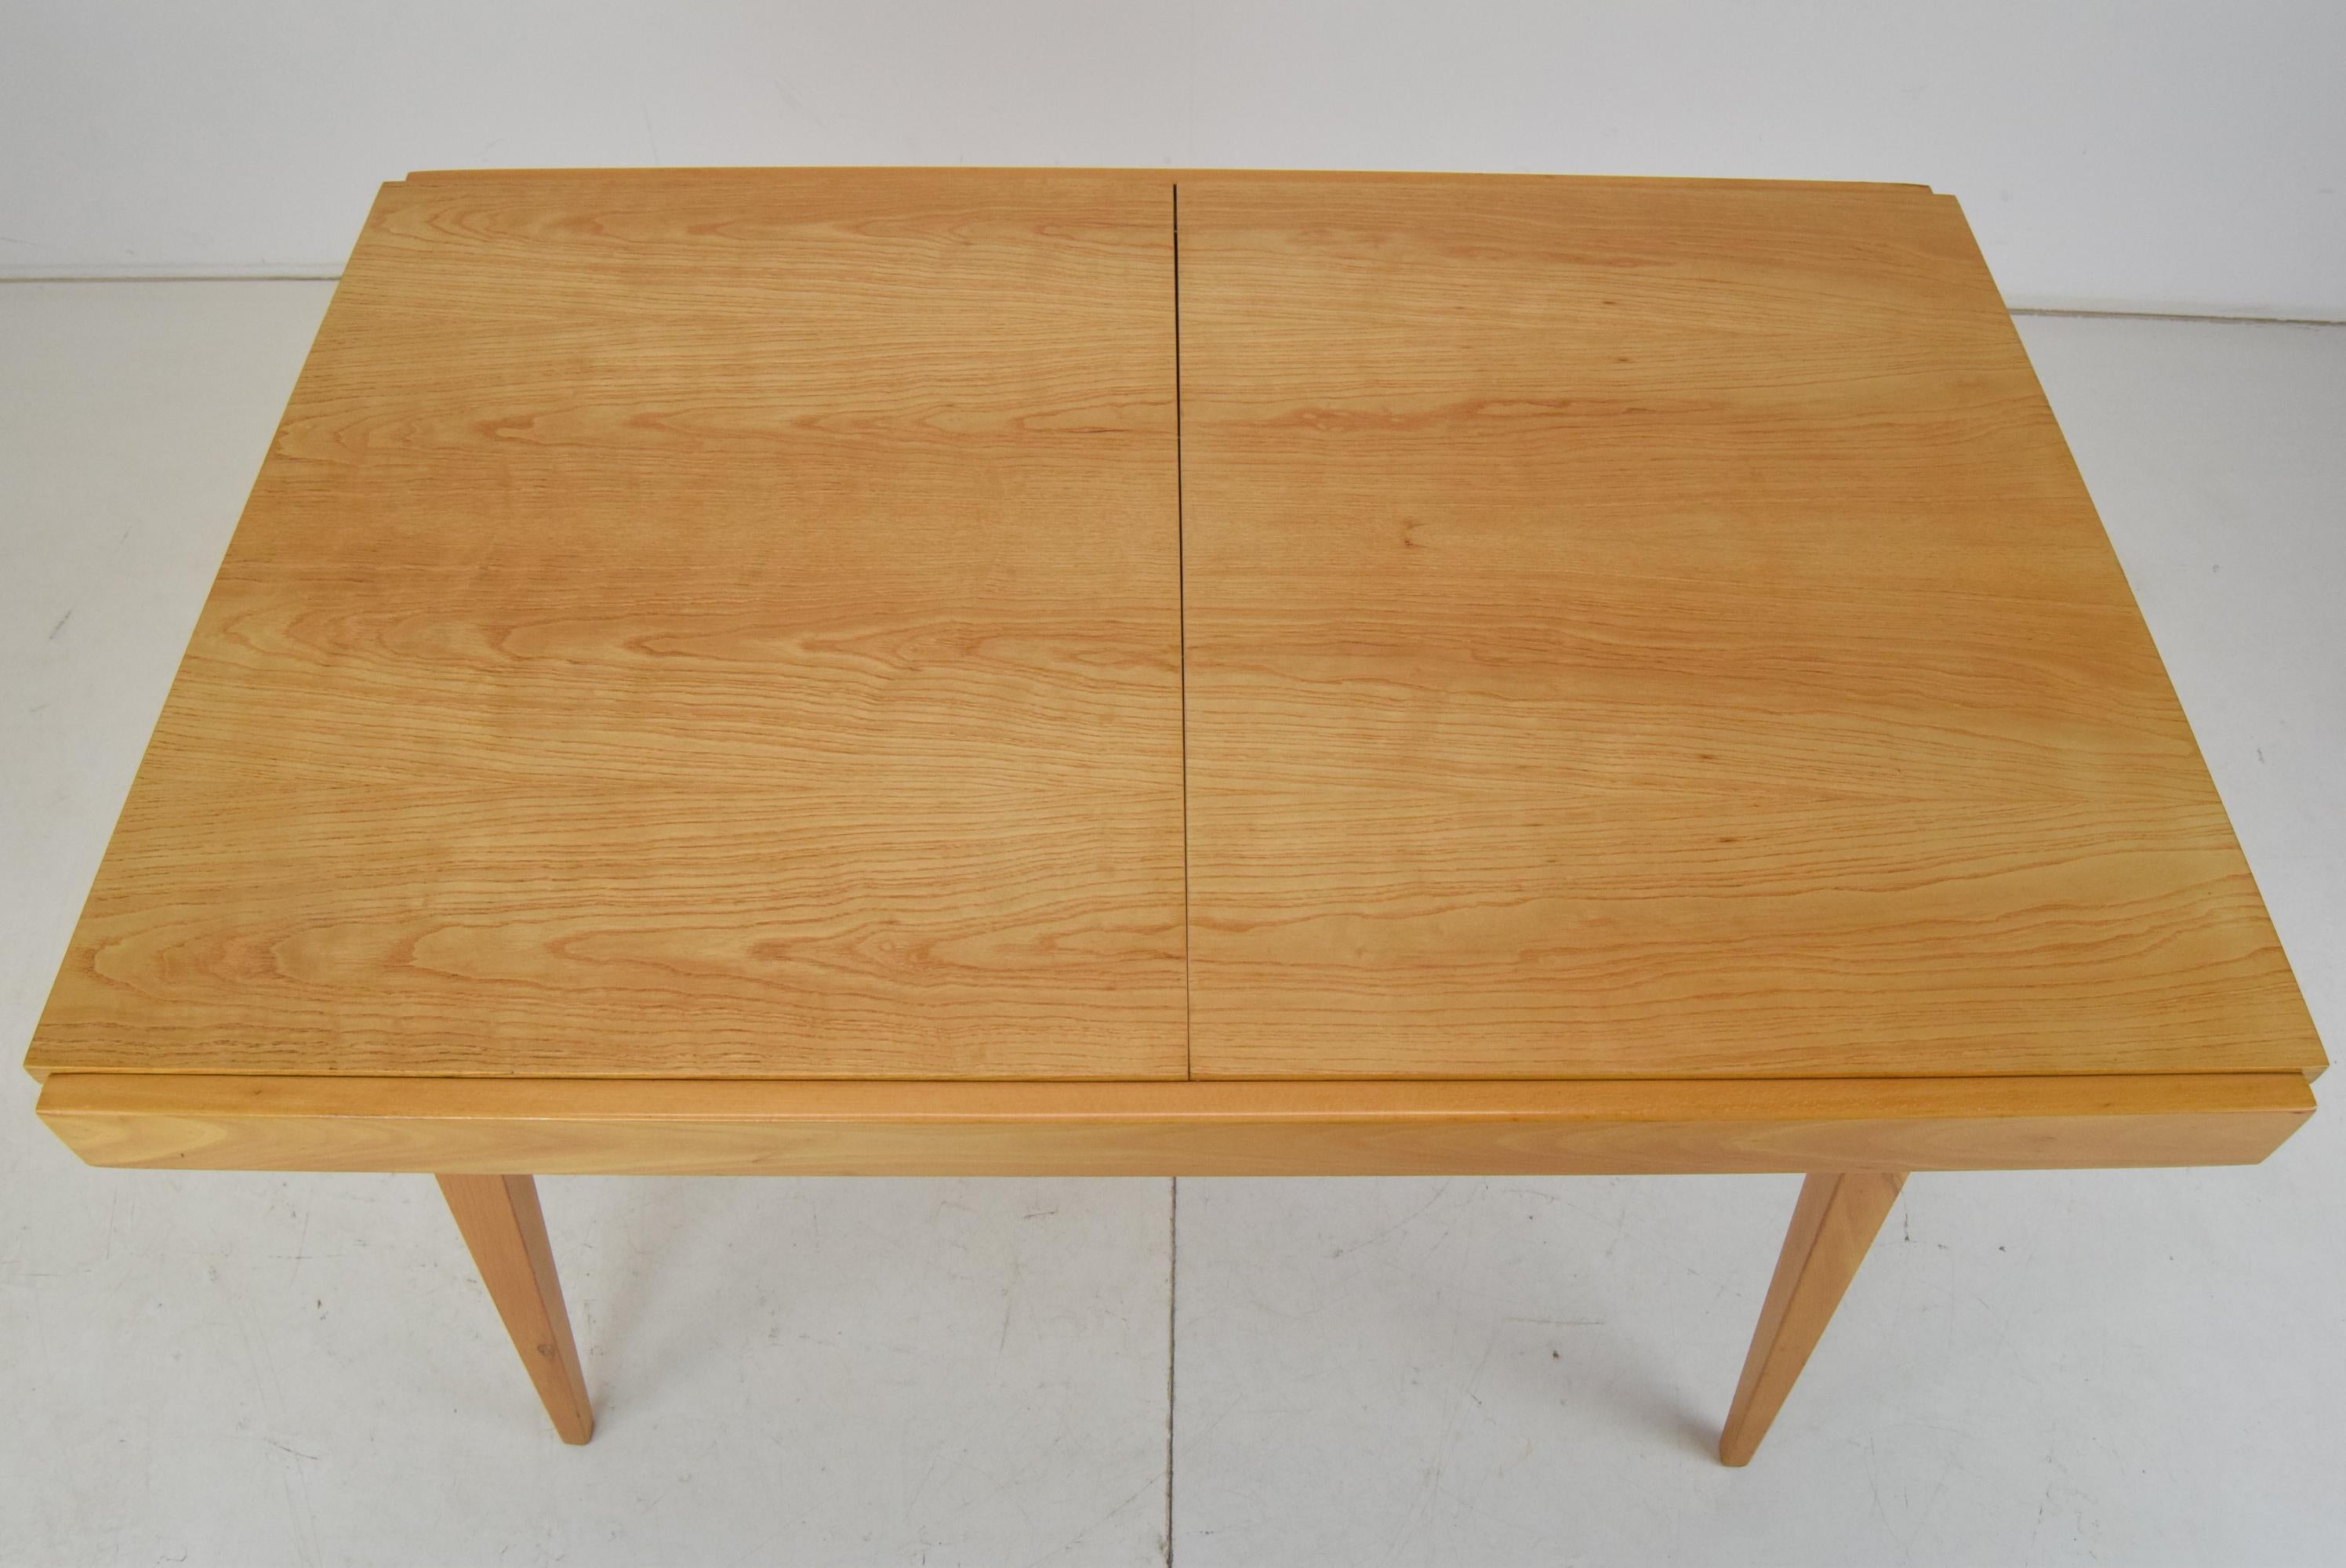 Czech Mid-Century Folding Dining Table by Frantisek Jirak for Tatra, 1960's For Sale